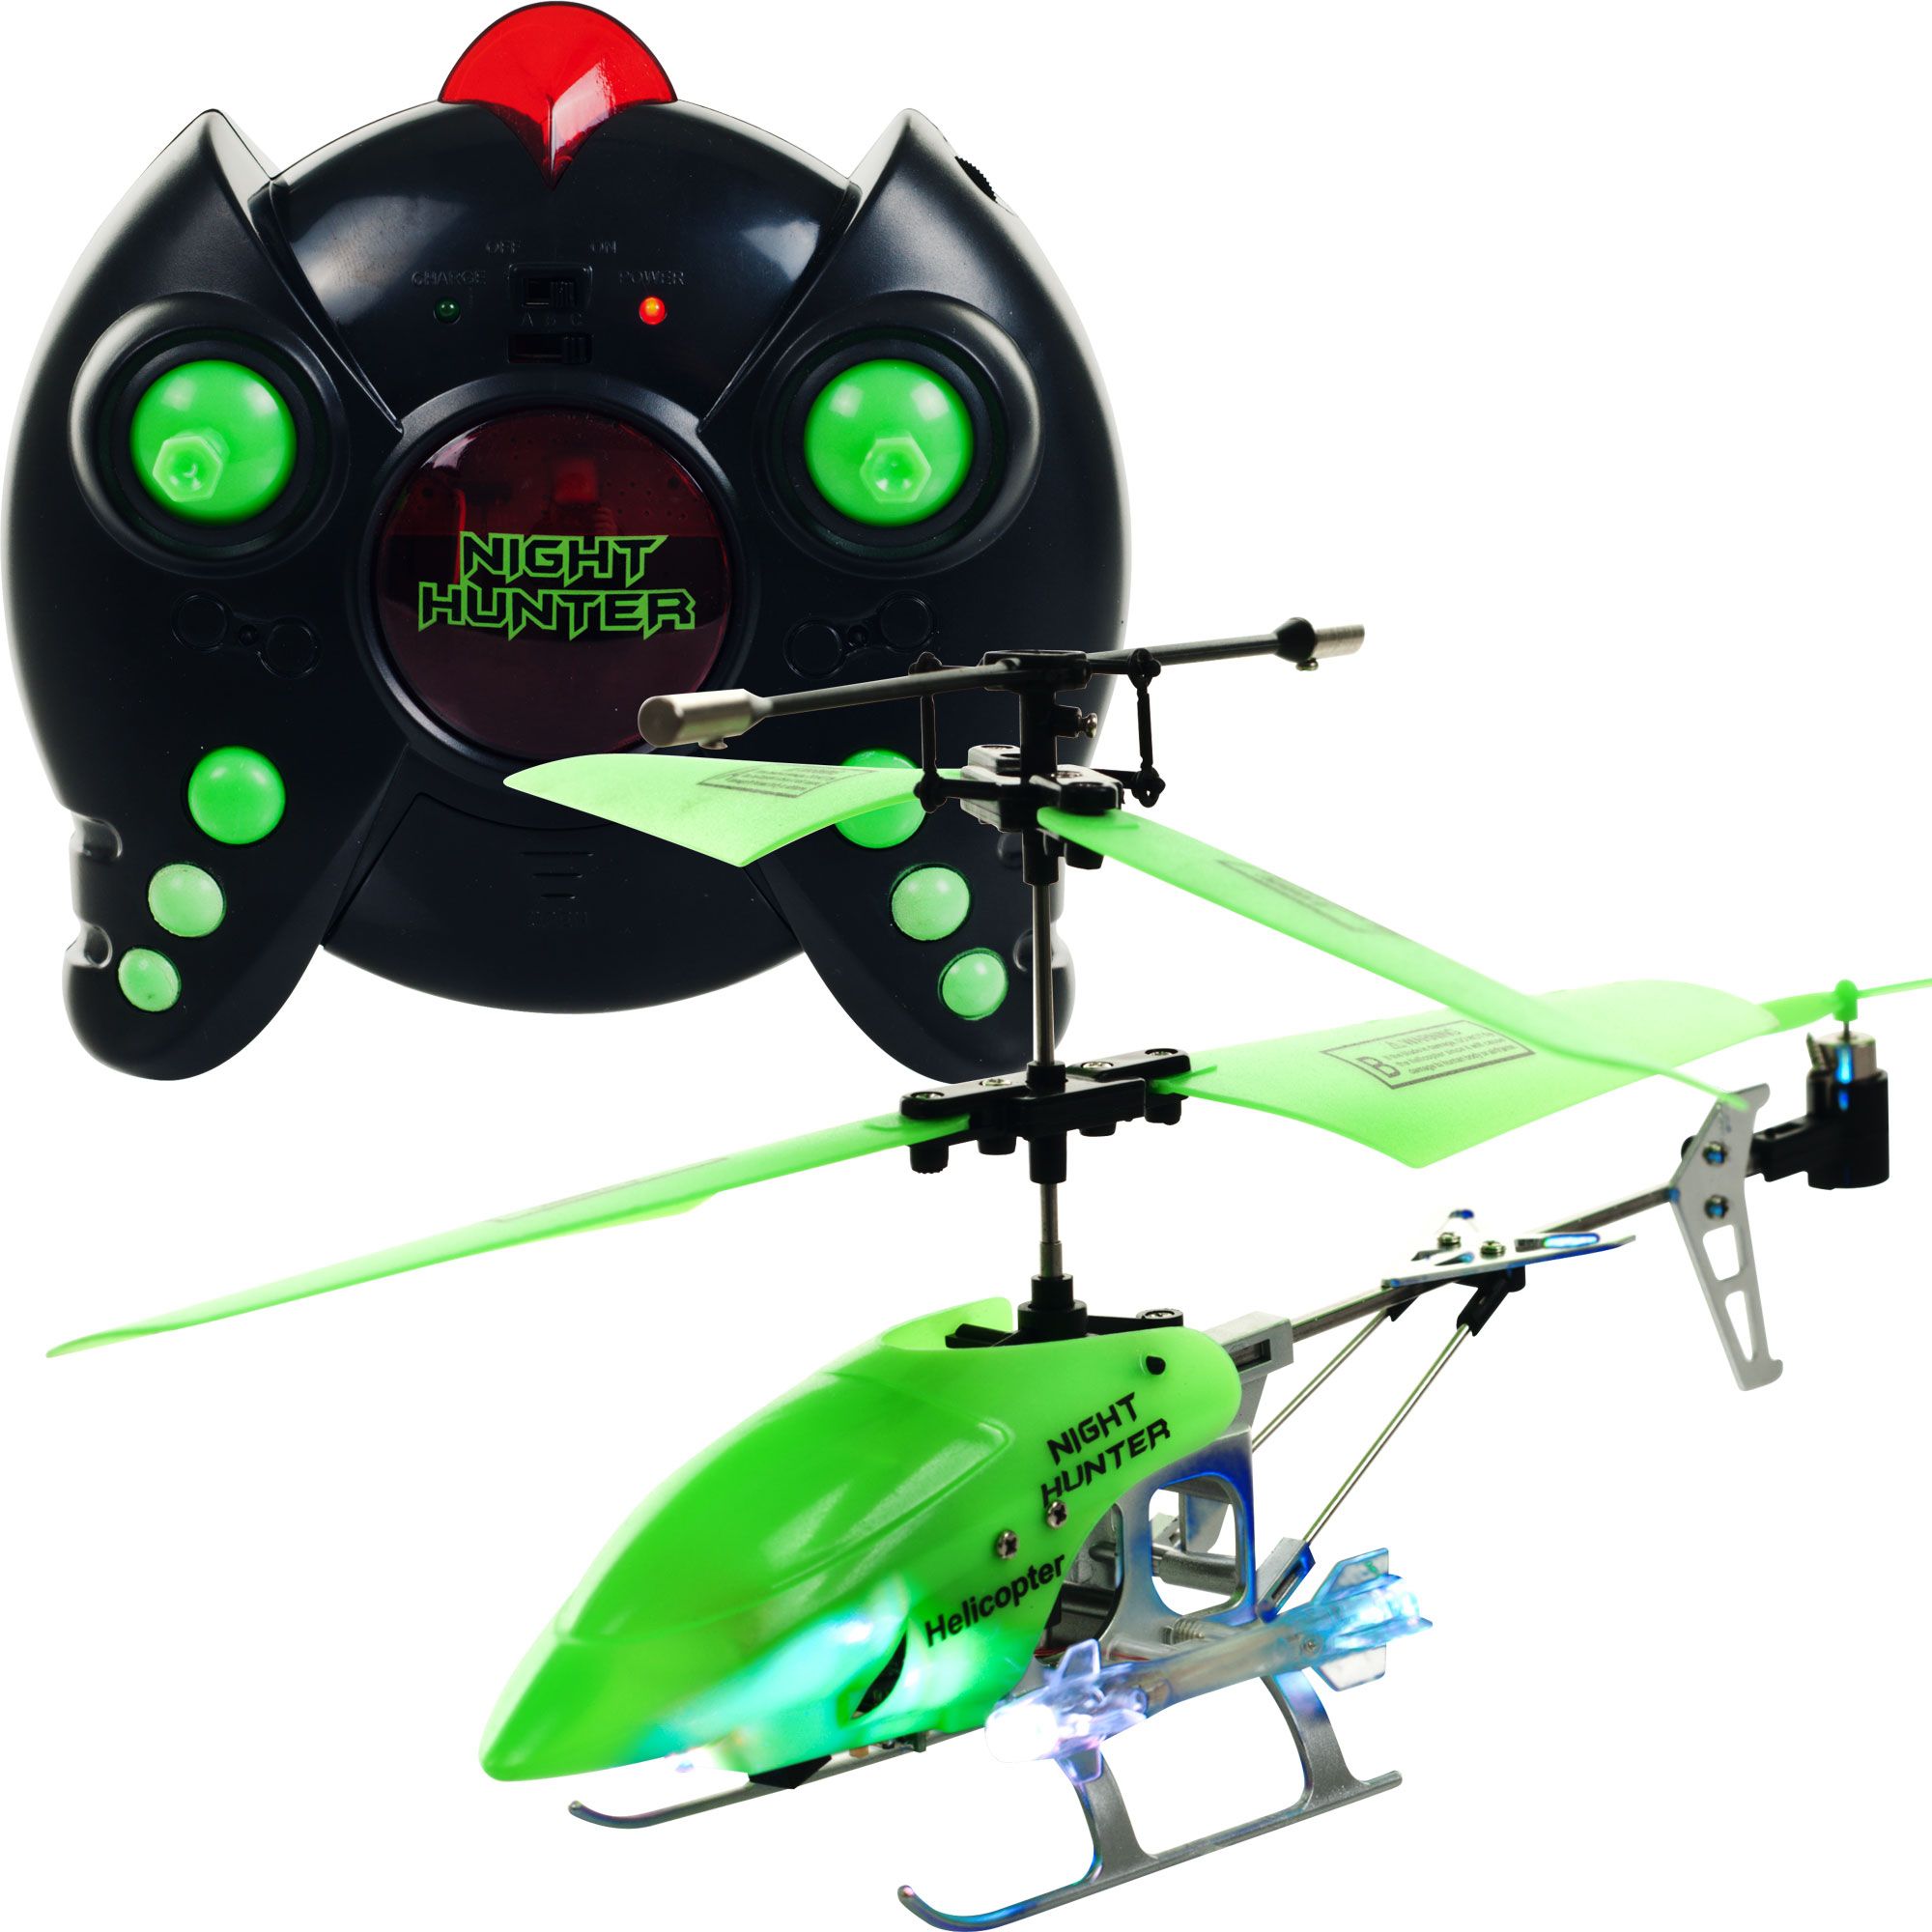 Night Hunter Xtreme Glow In The Dark RC Helicopter